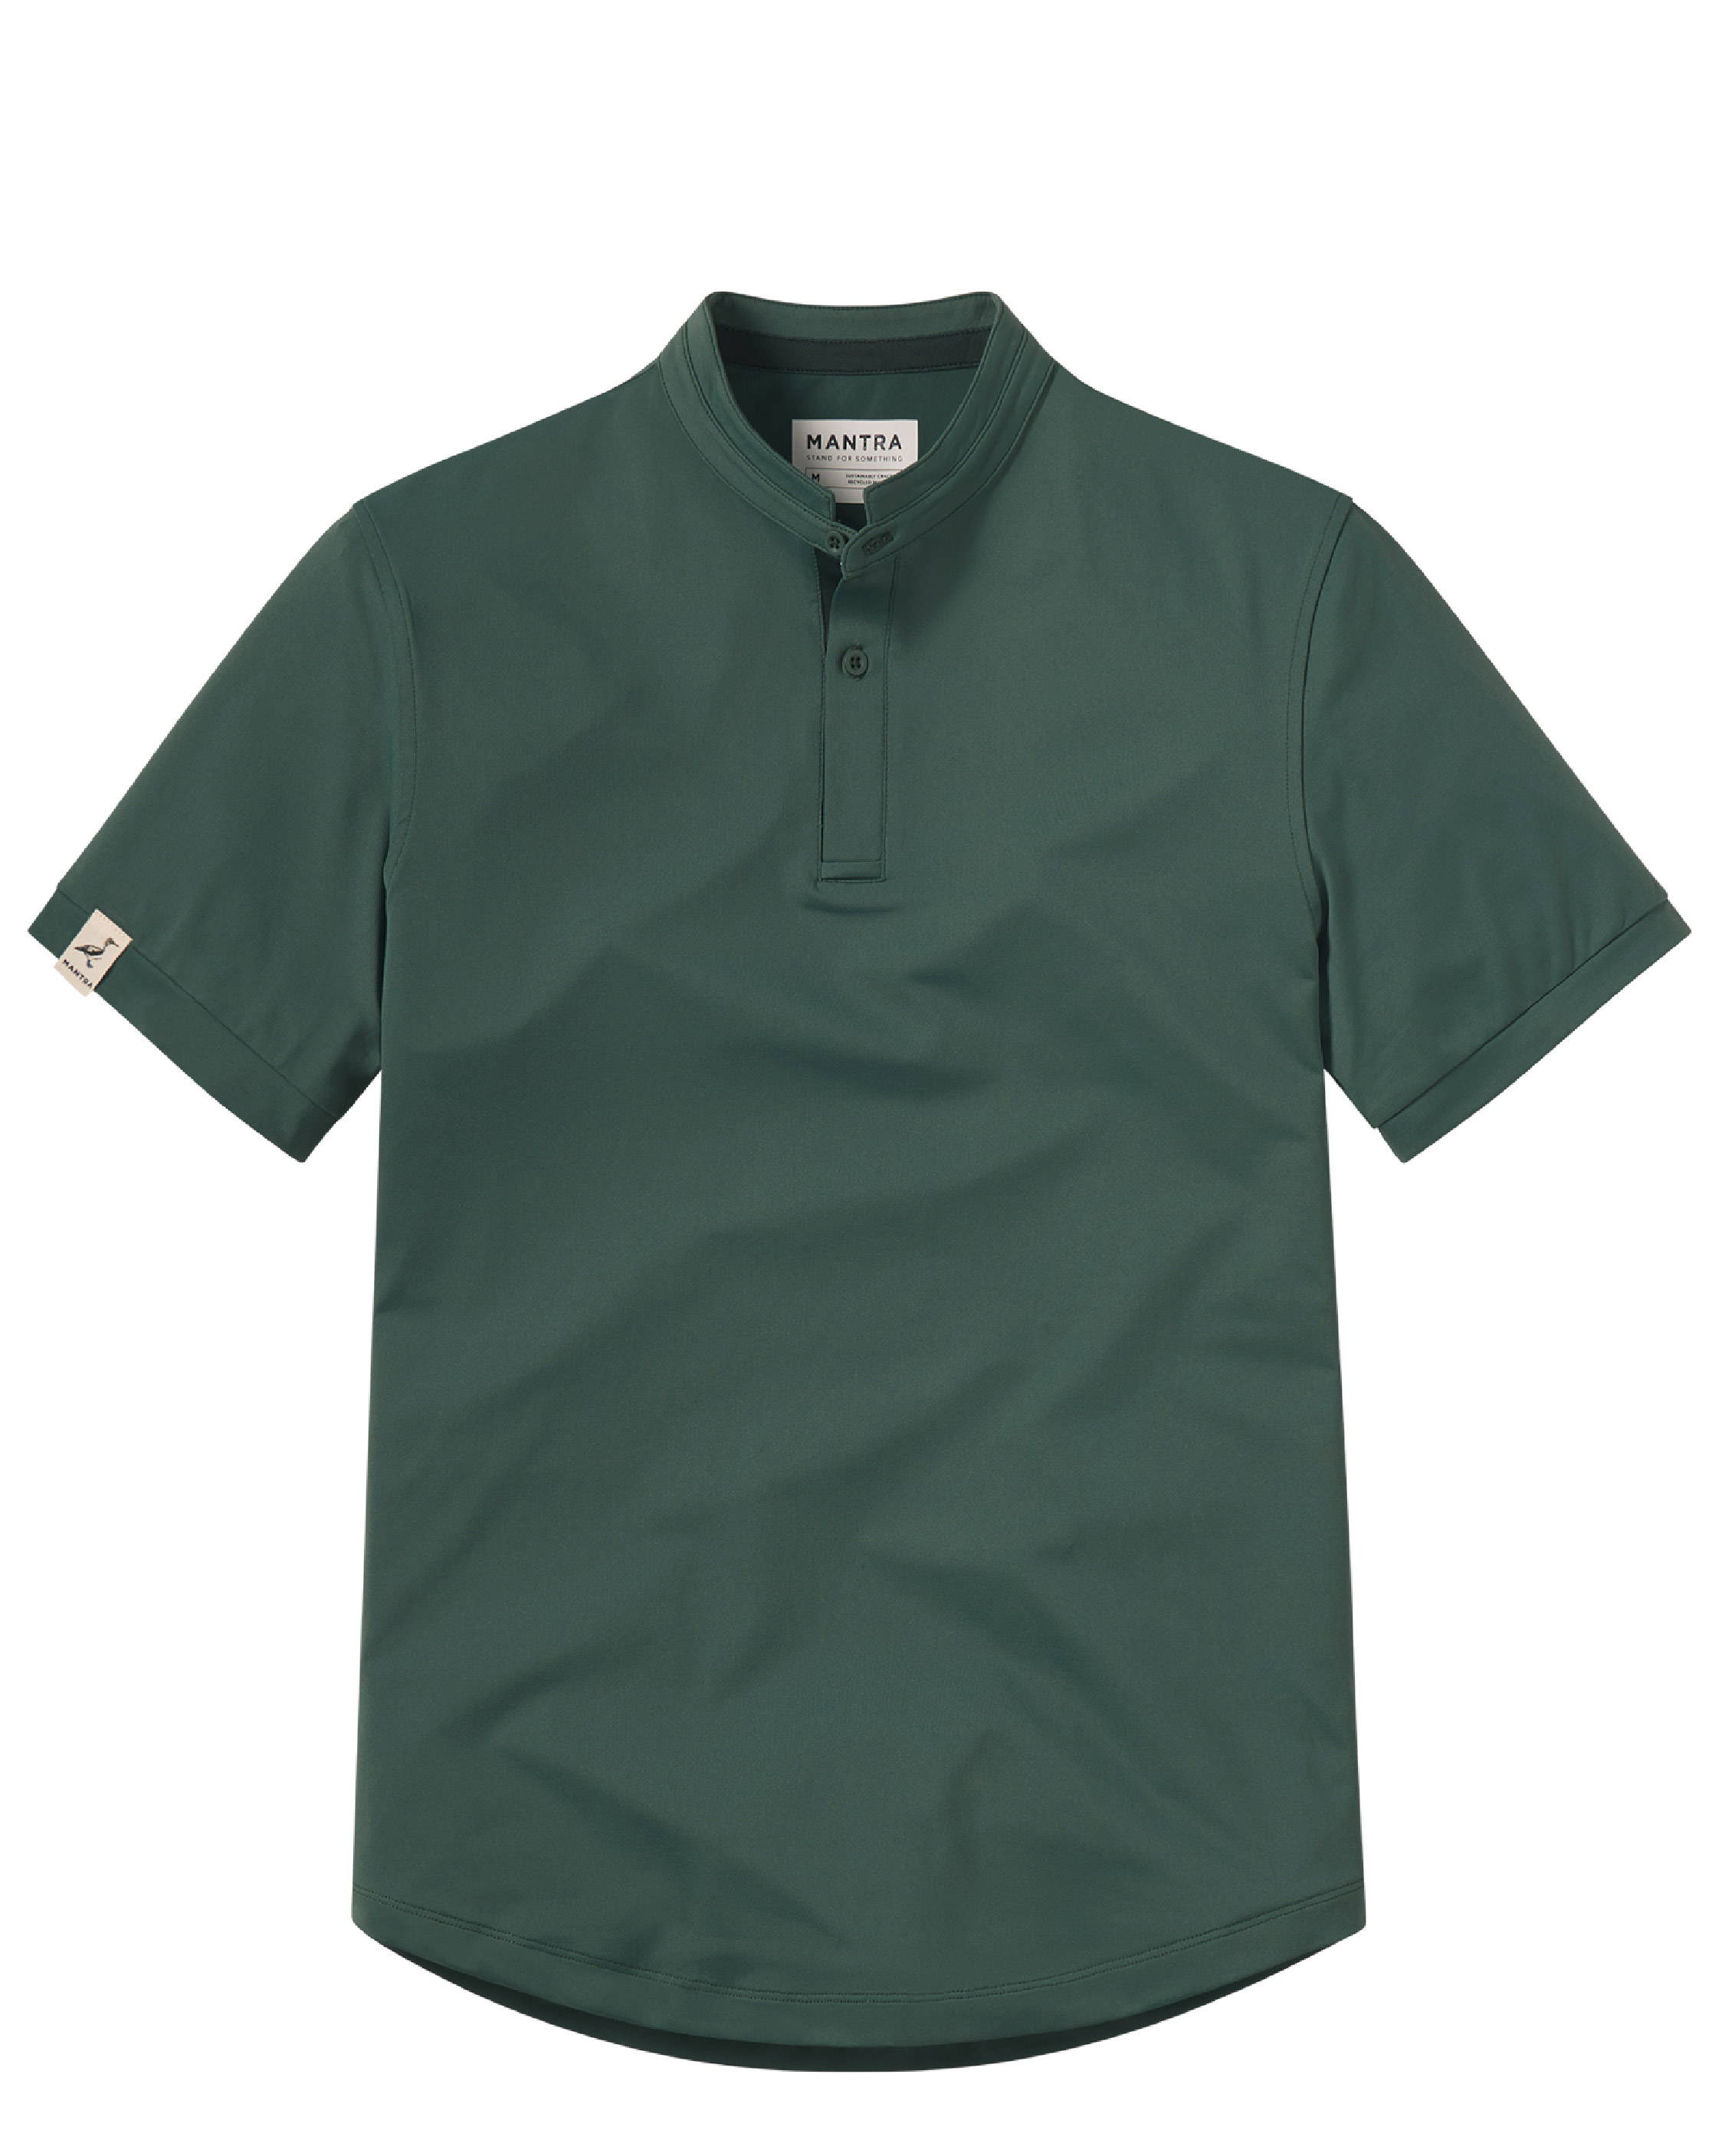 MANTRA TREELINE Polo - sustainable mens performance polo made from recycled materials